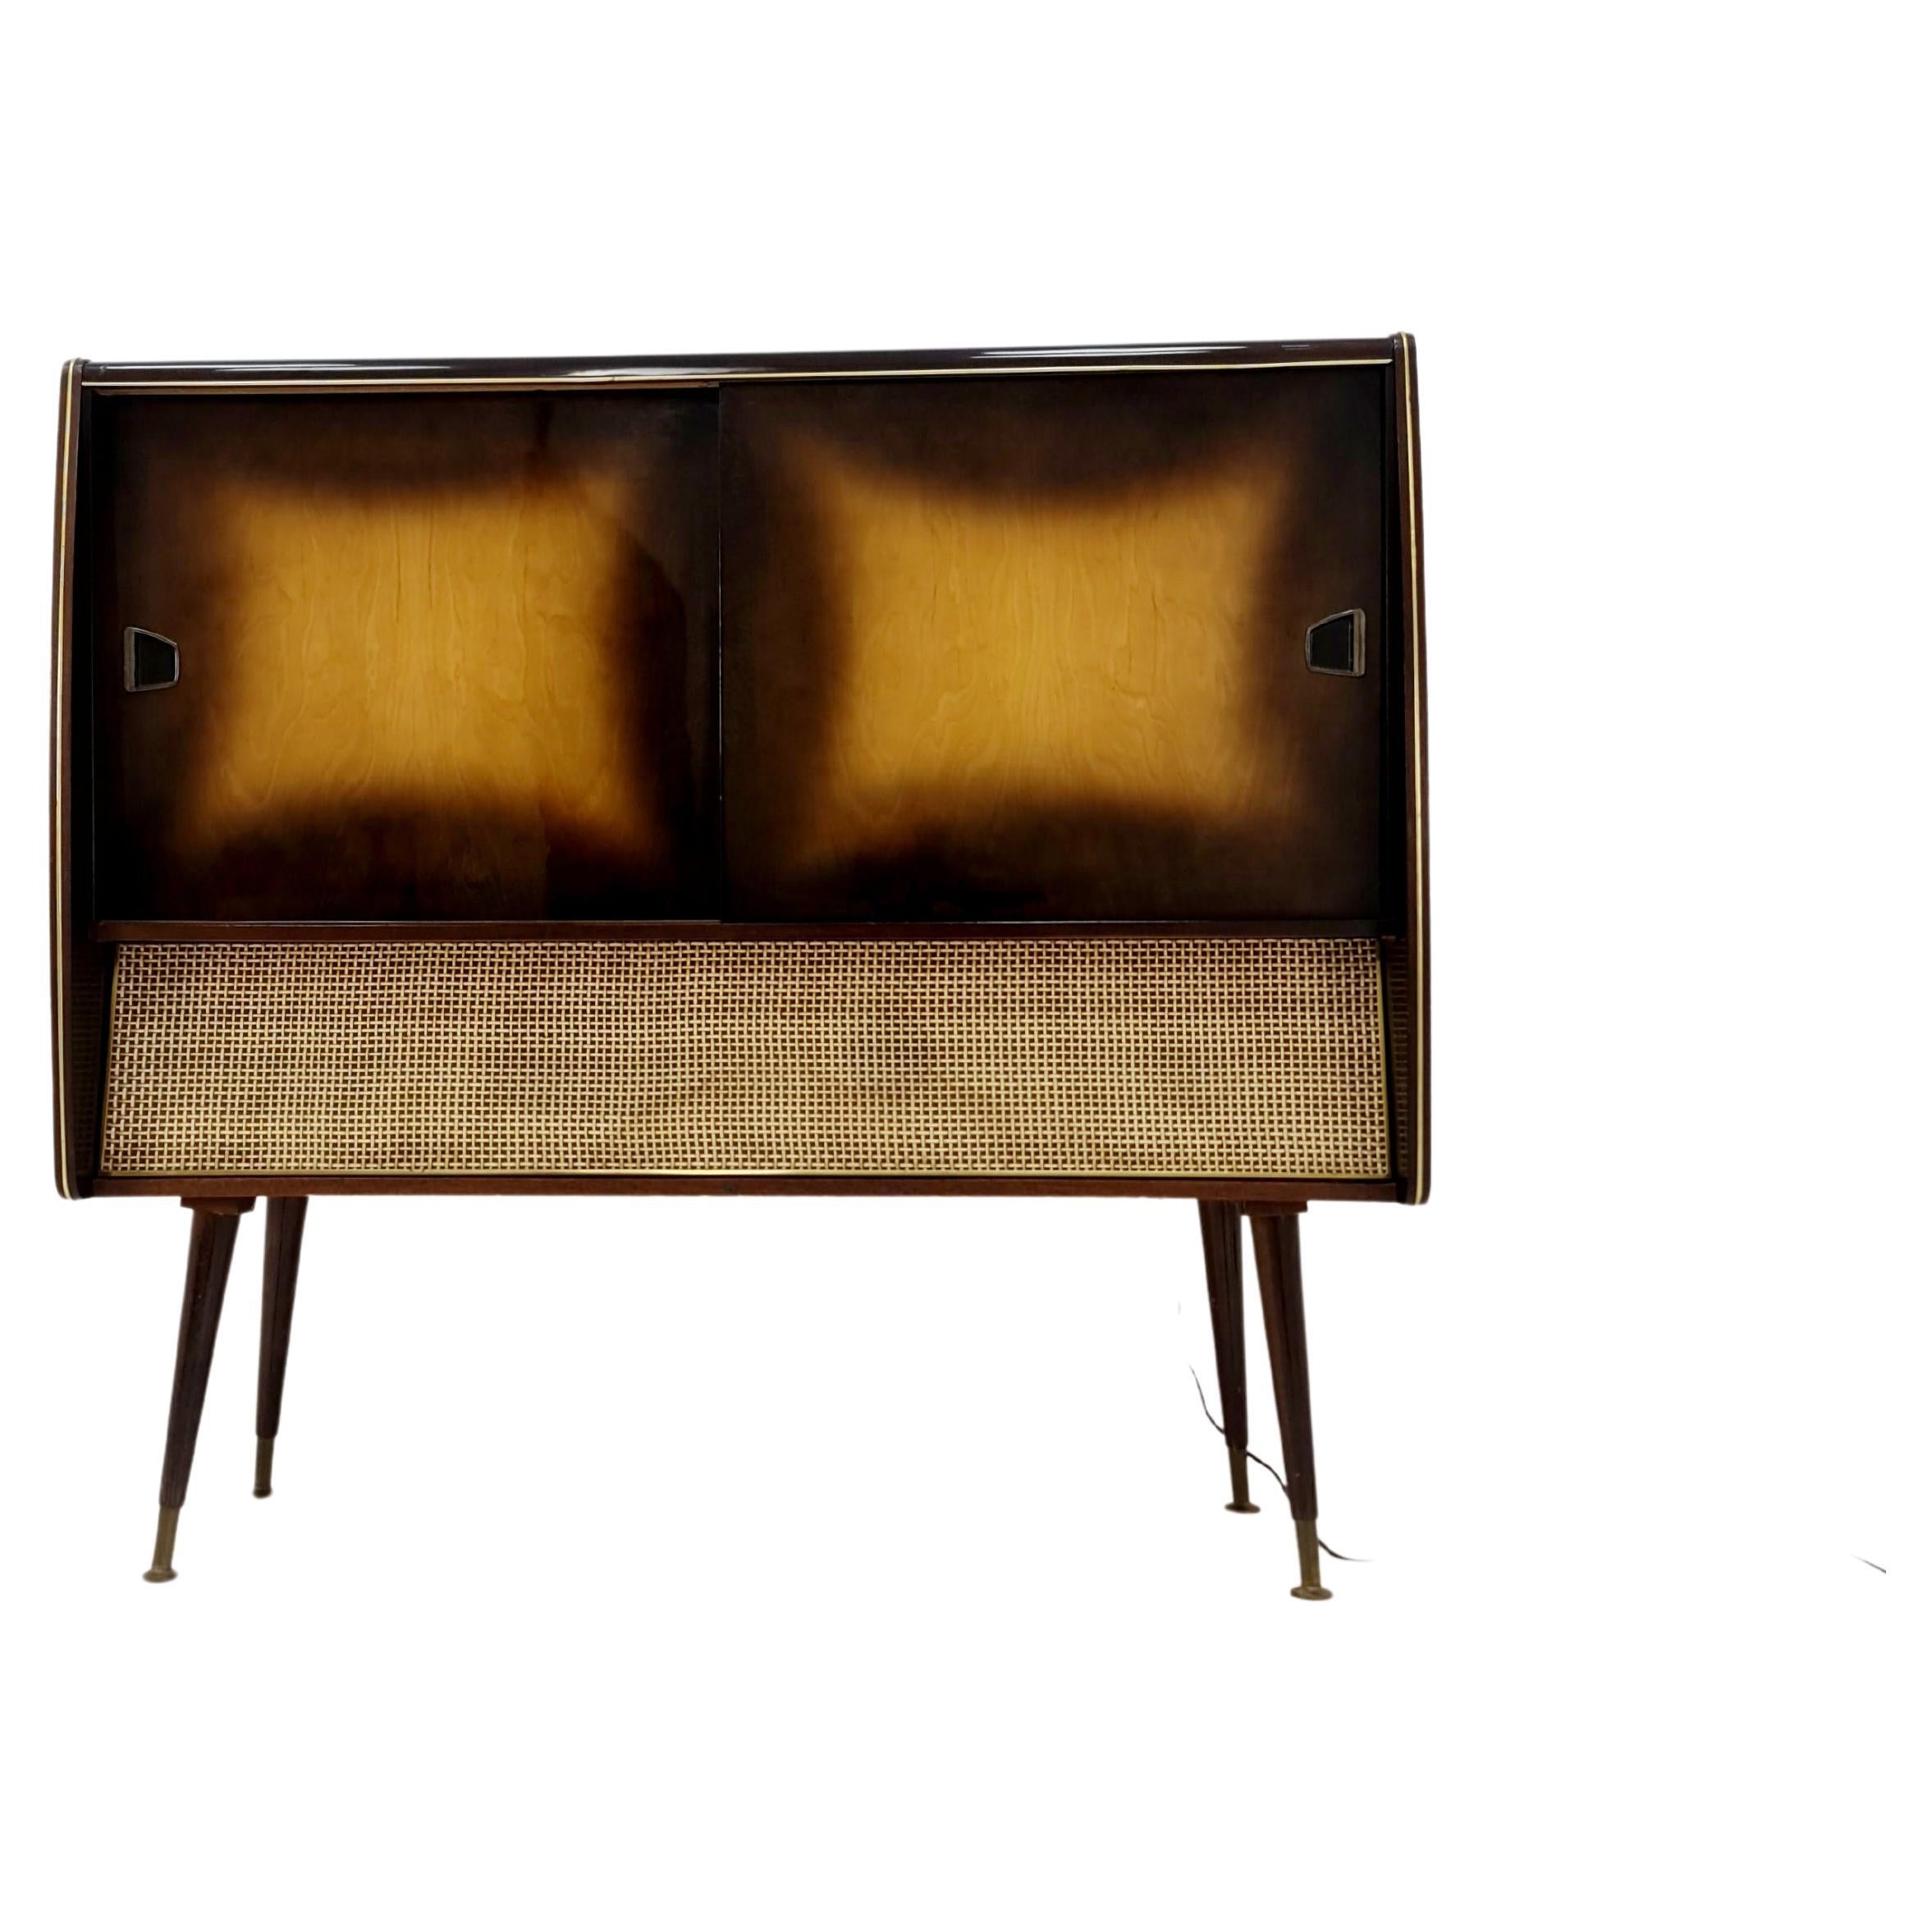 Mid Century Modern German record player, radio by Siemens , 1950s

The radio is in fully functional. 

Dimensions: 
43   D x 120 W x 111  H

It is in good vintage condition, however, as with all vintage items some minor wear marks should be